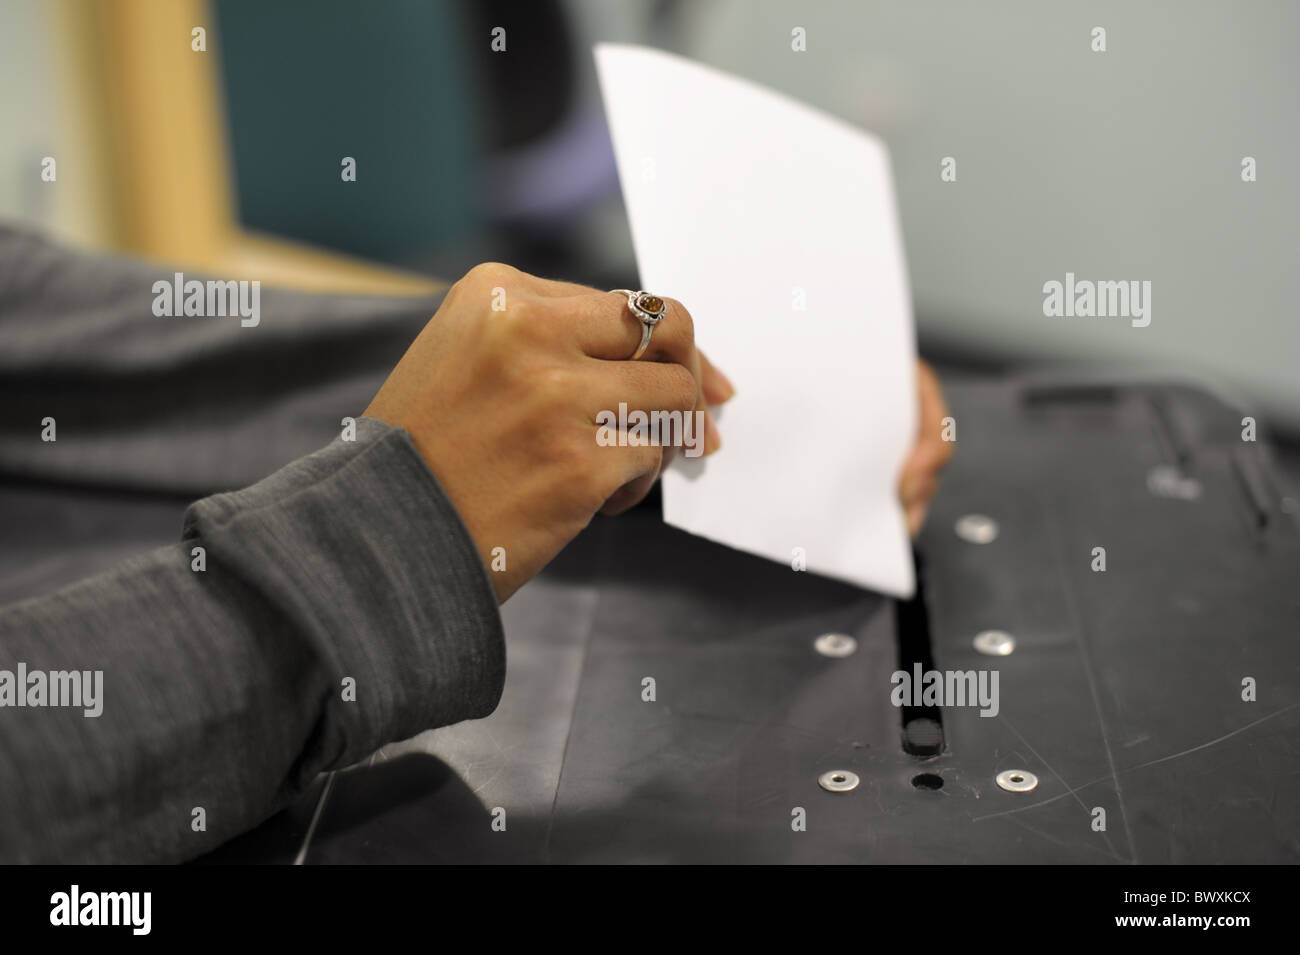 Young Asian woman's hand holding a ballot paper as she casts her vote and puts it into a black ballot box at an election Stock Photo